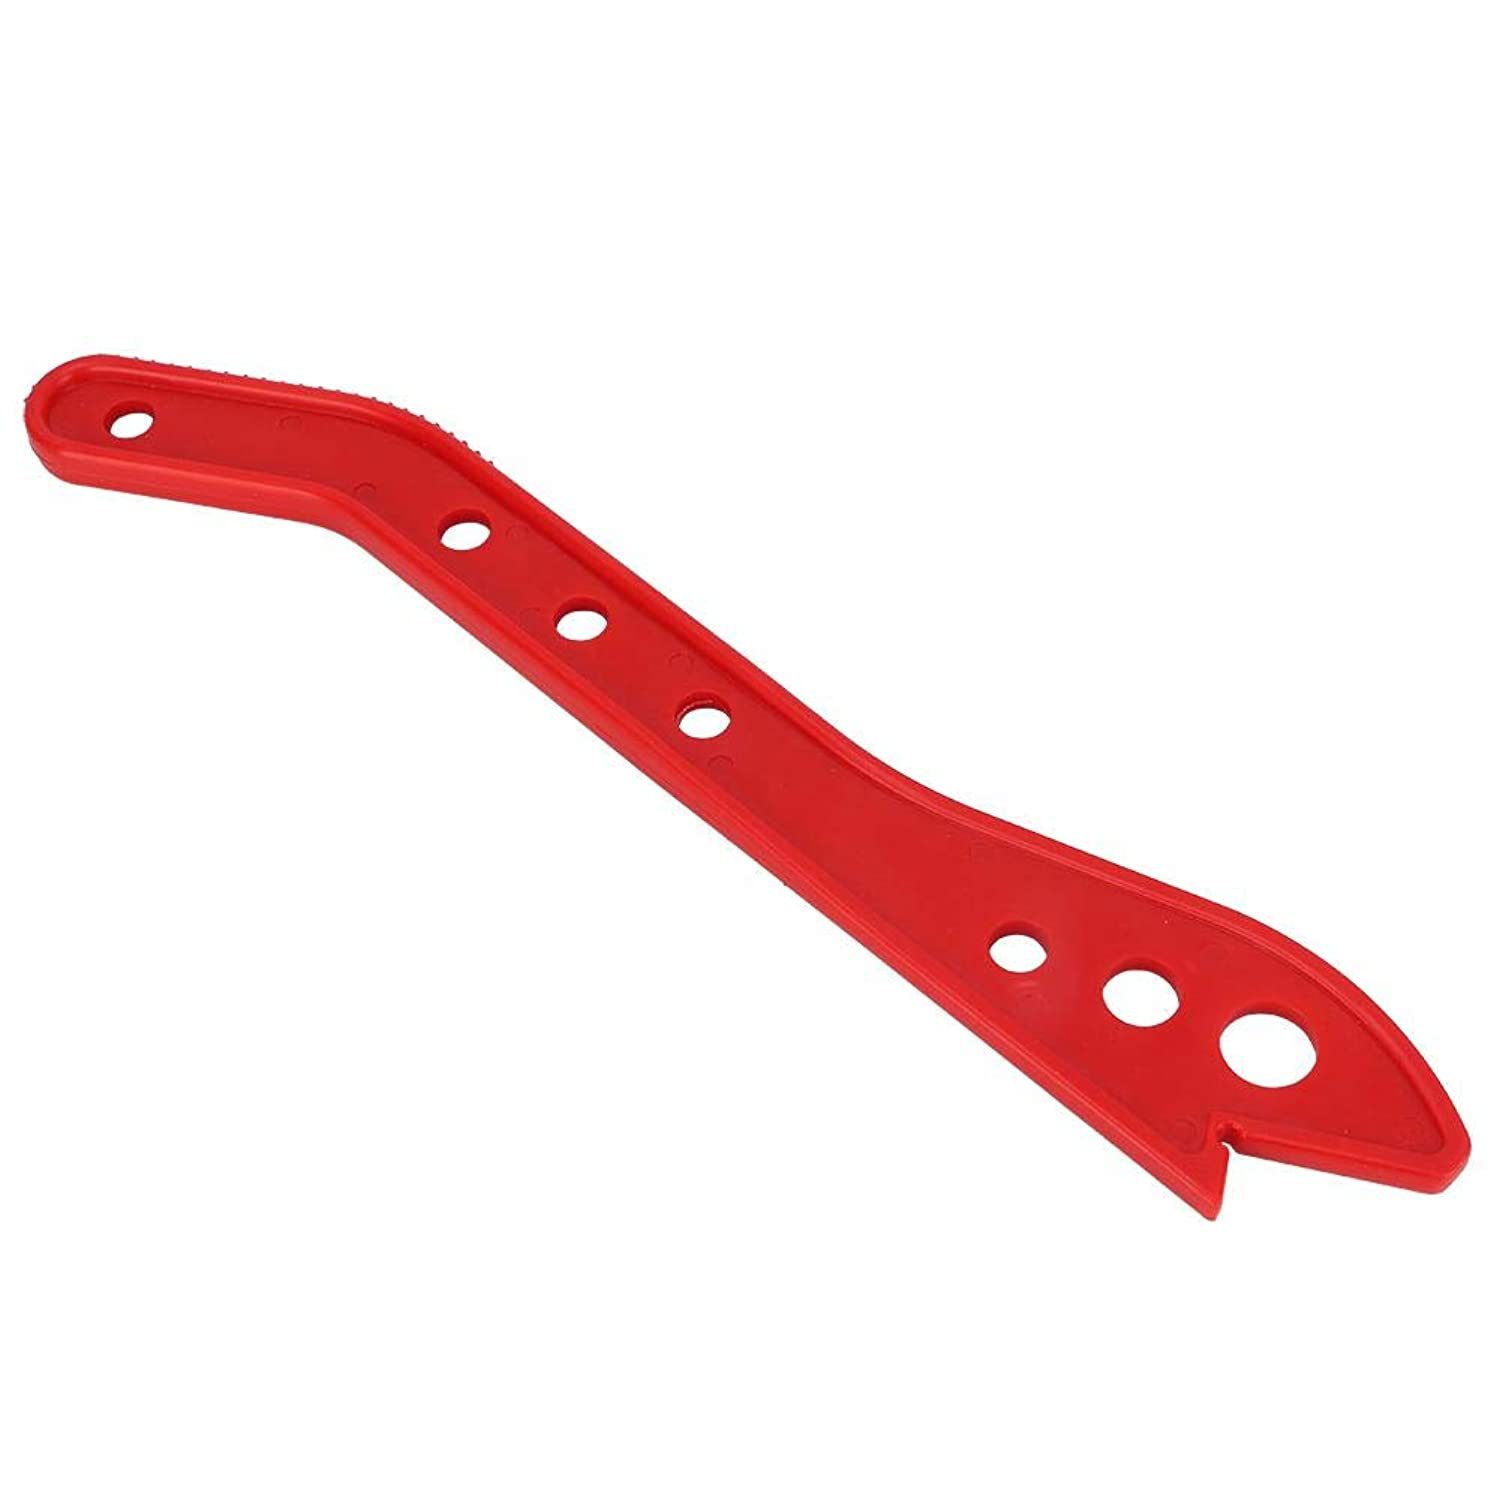 Saw Blade Push Stick, Red Wood Push Stick, Effective Handle-Design Safety Push S